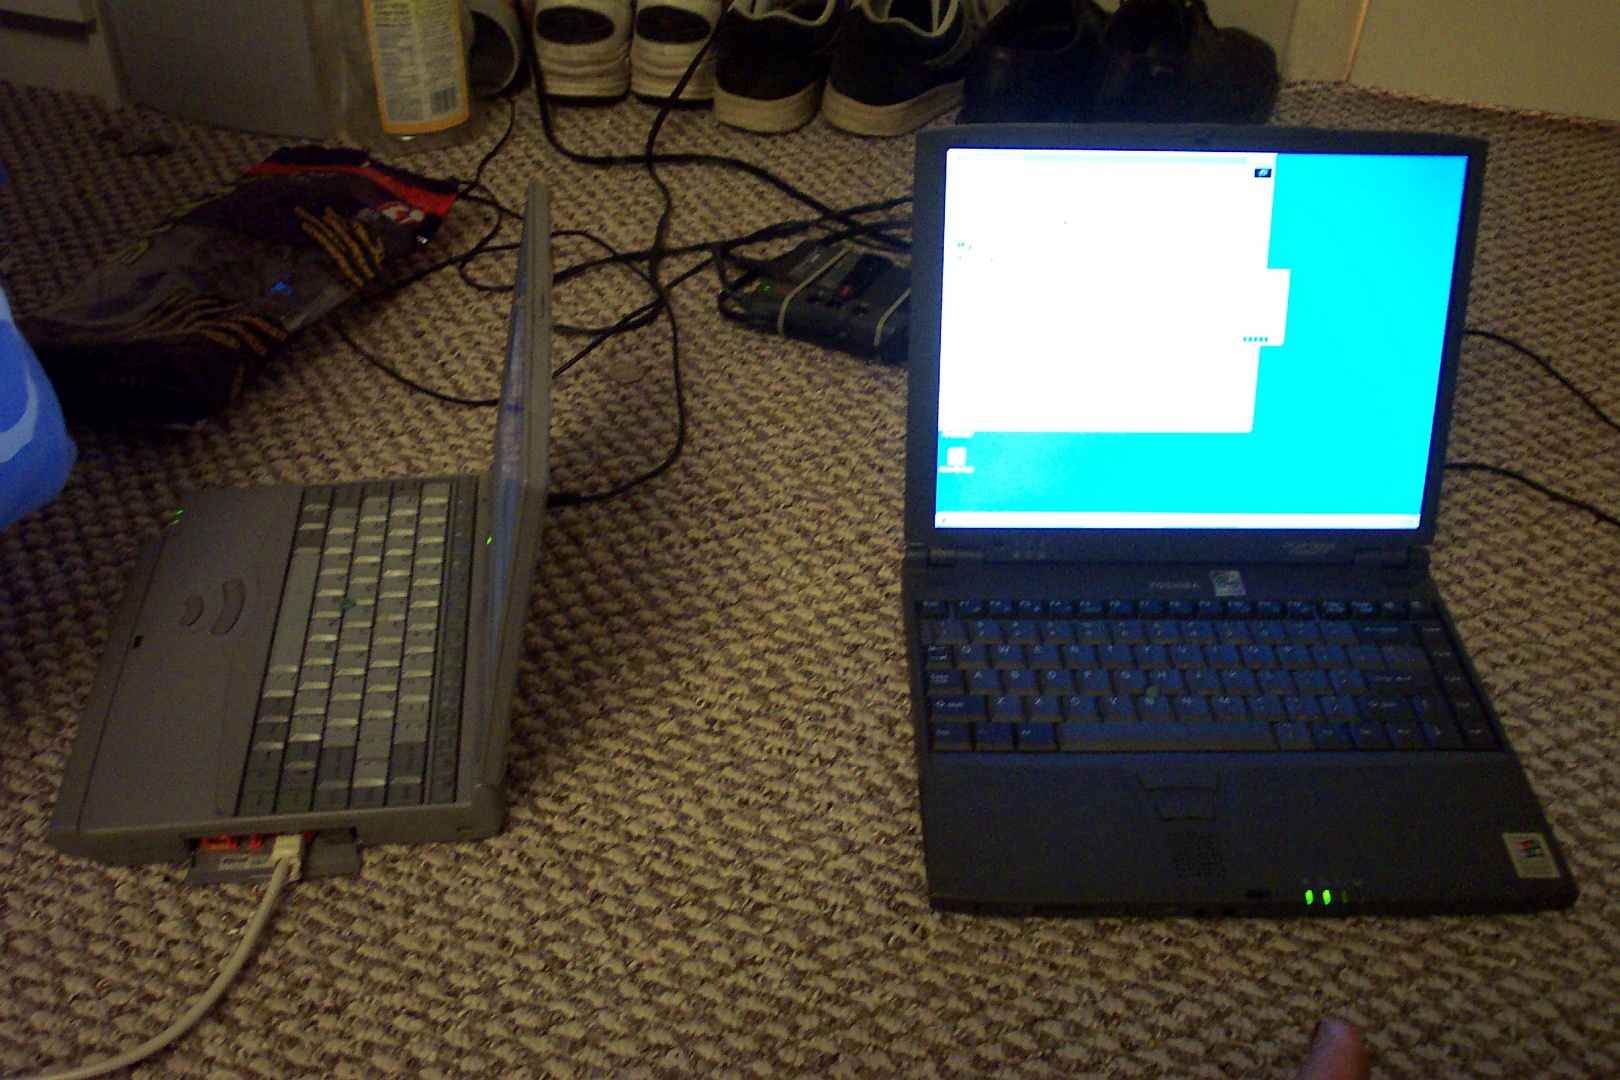 Two laptops, both powered on and running Windows, sitting on carpet